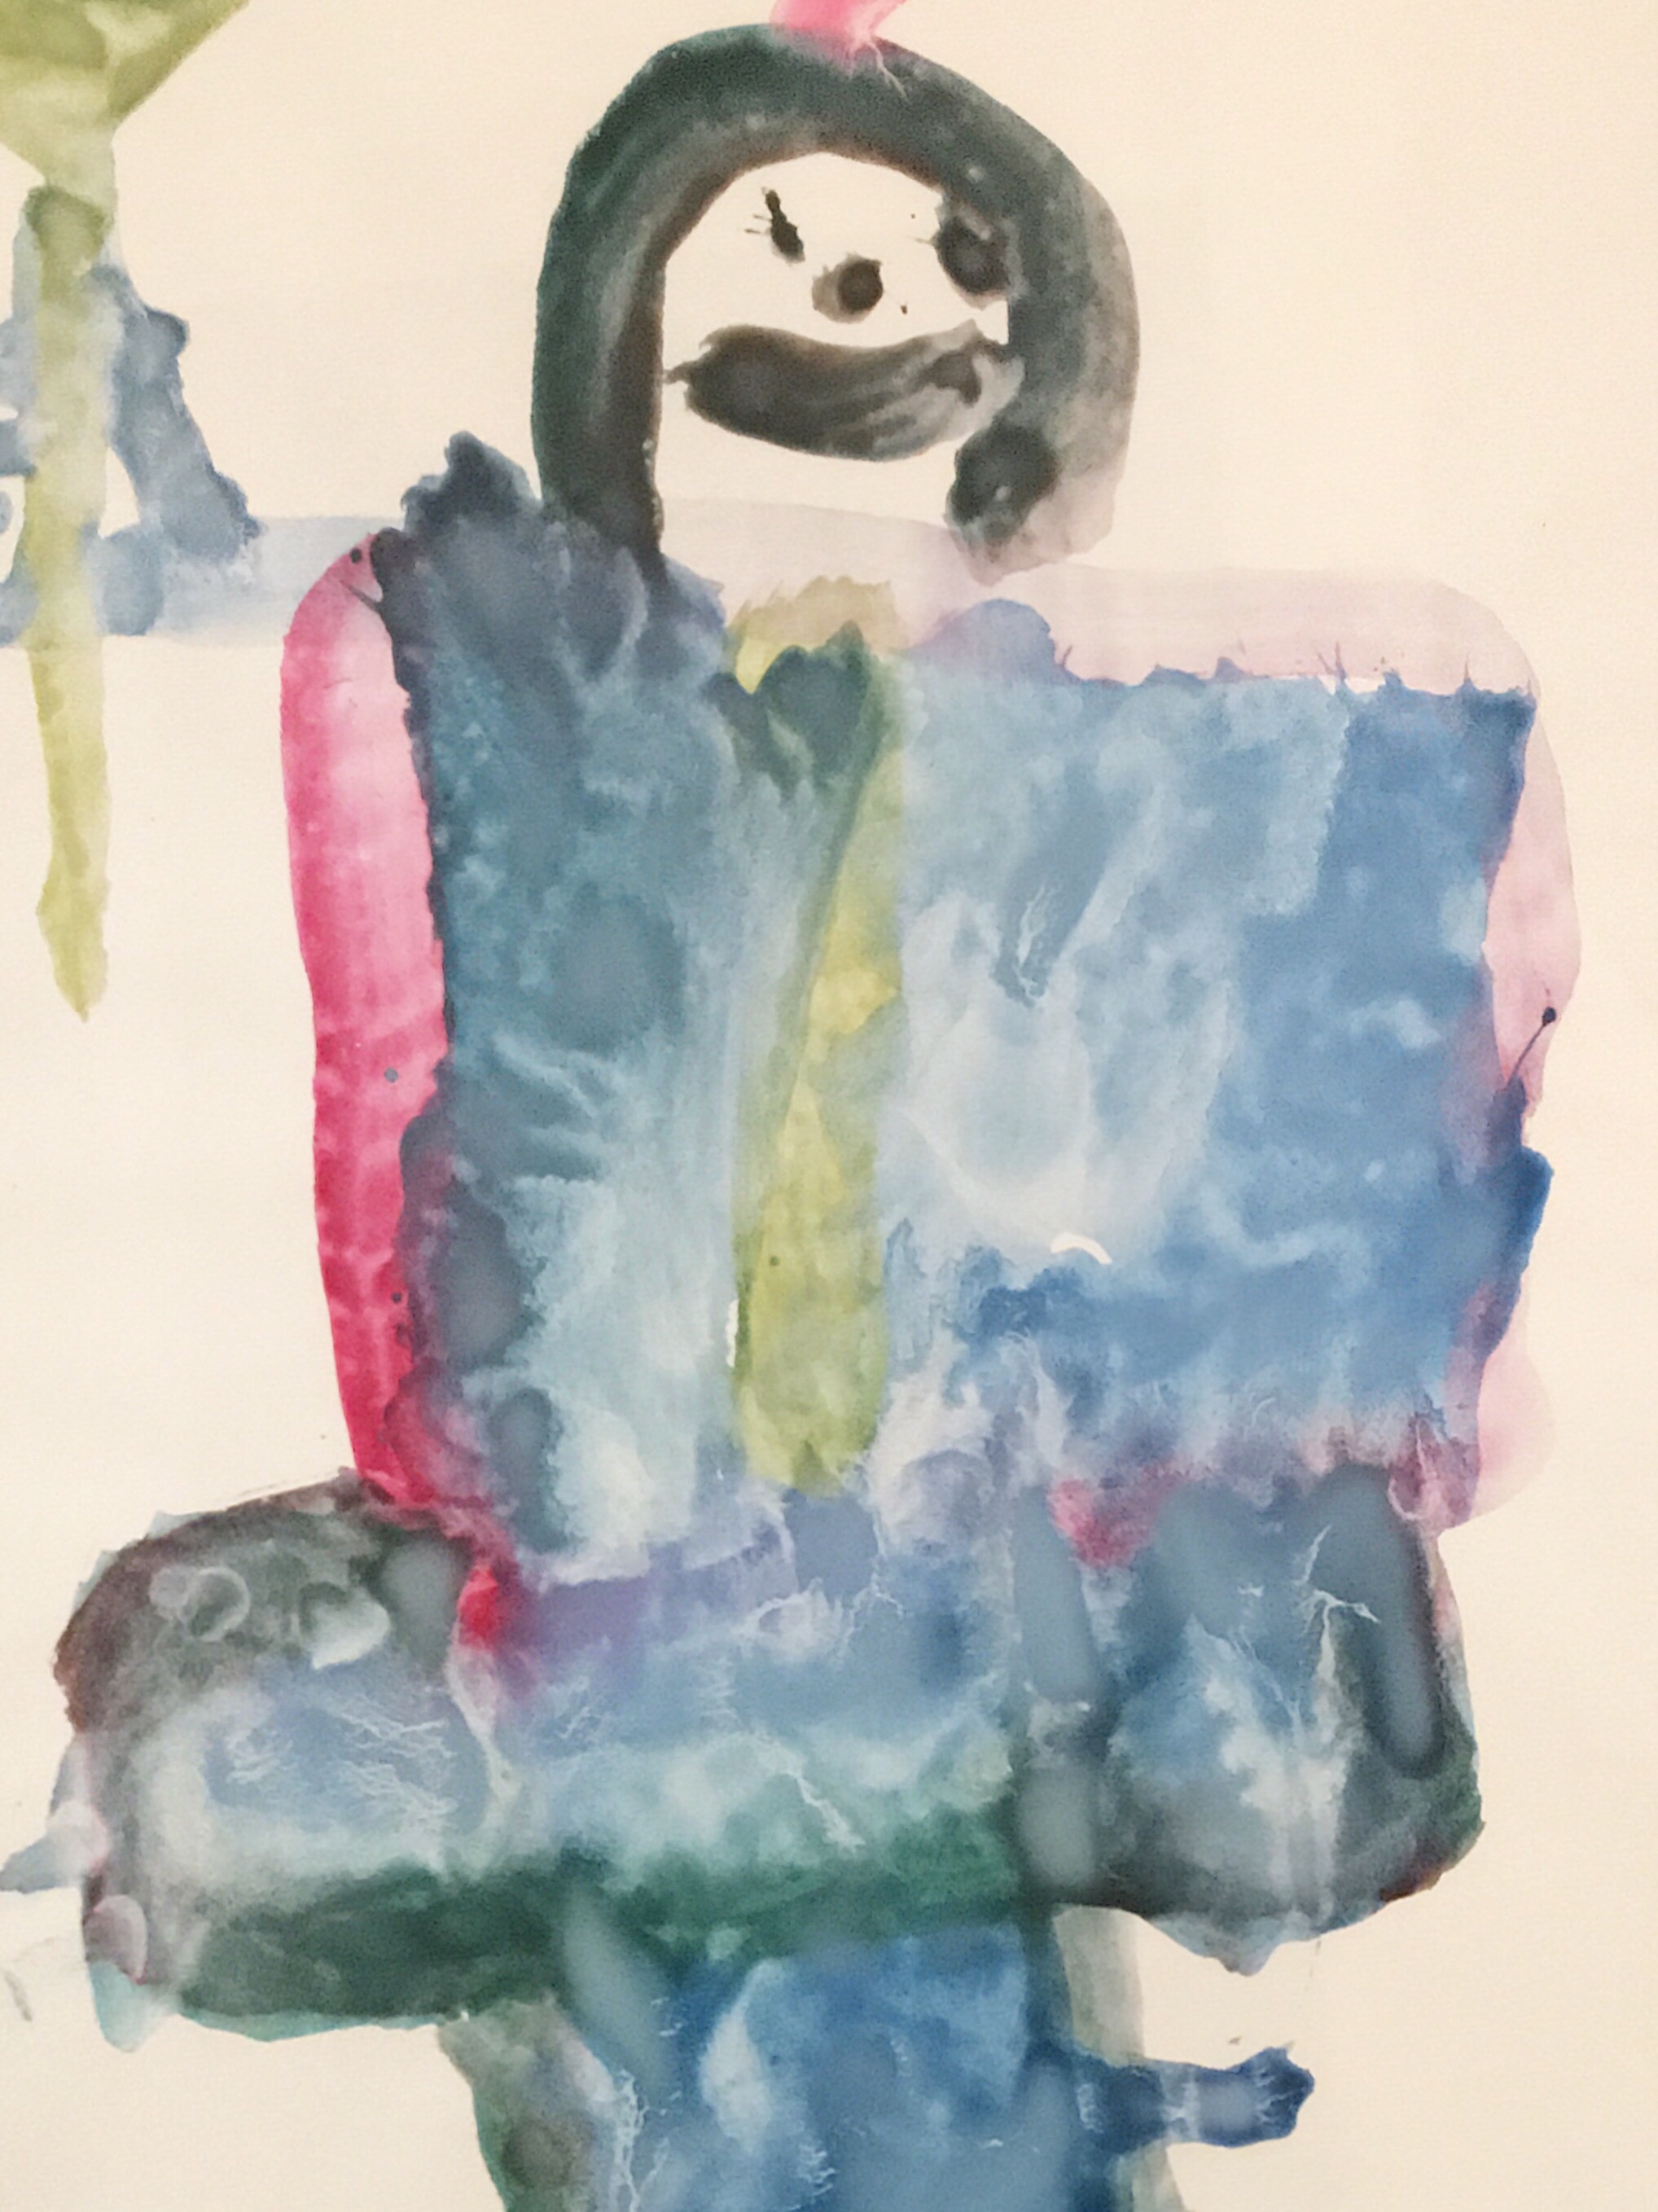 watercolor self portrait done at age 4